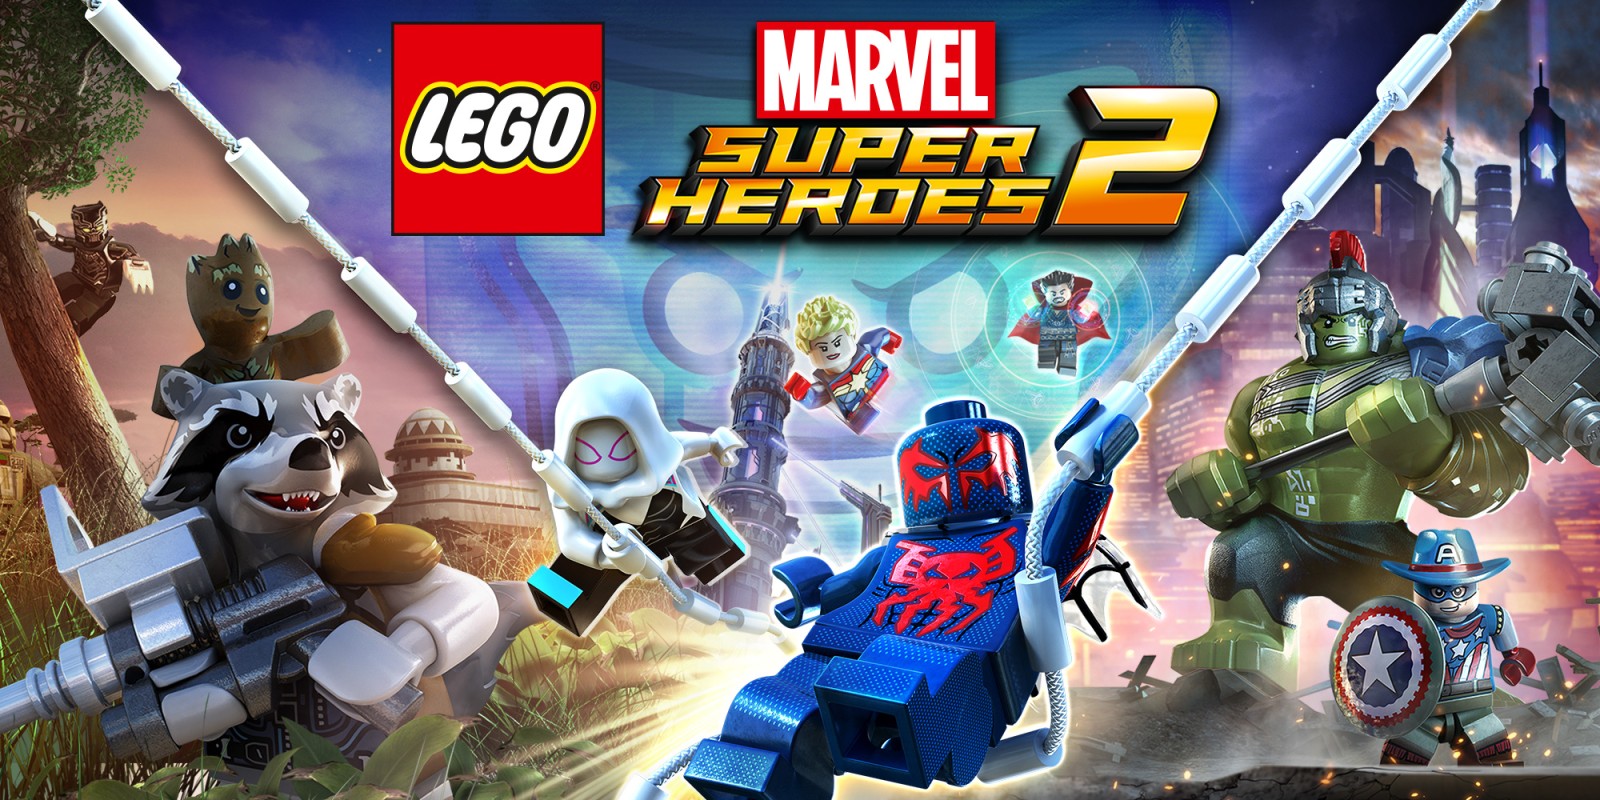 Lego Marvel Super Heroes 2 free Download PC Game (Full Version)